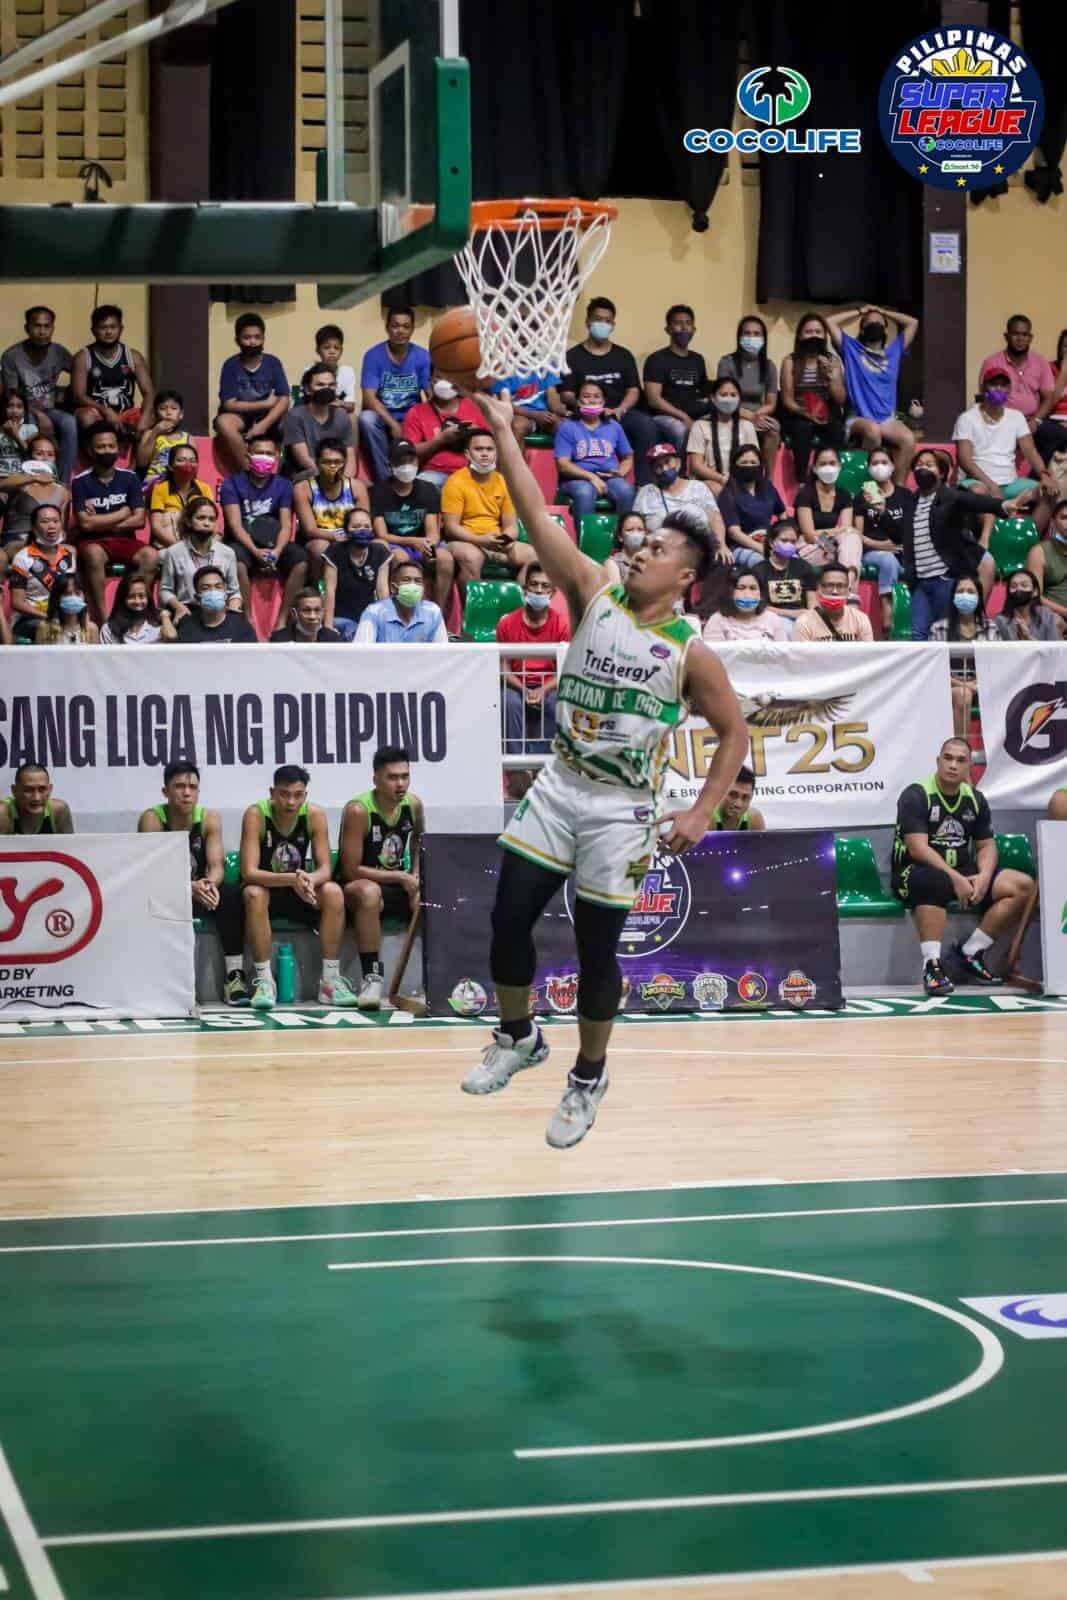 A basketball player dunking the ball in the Pilipinas Super League Pearl of the Orient Cup.